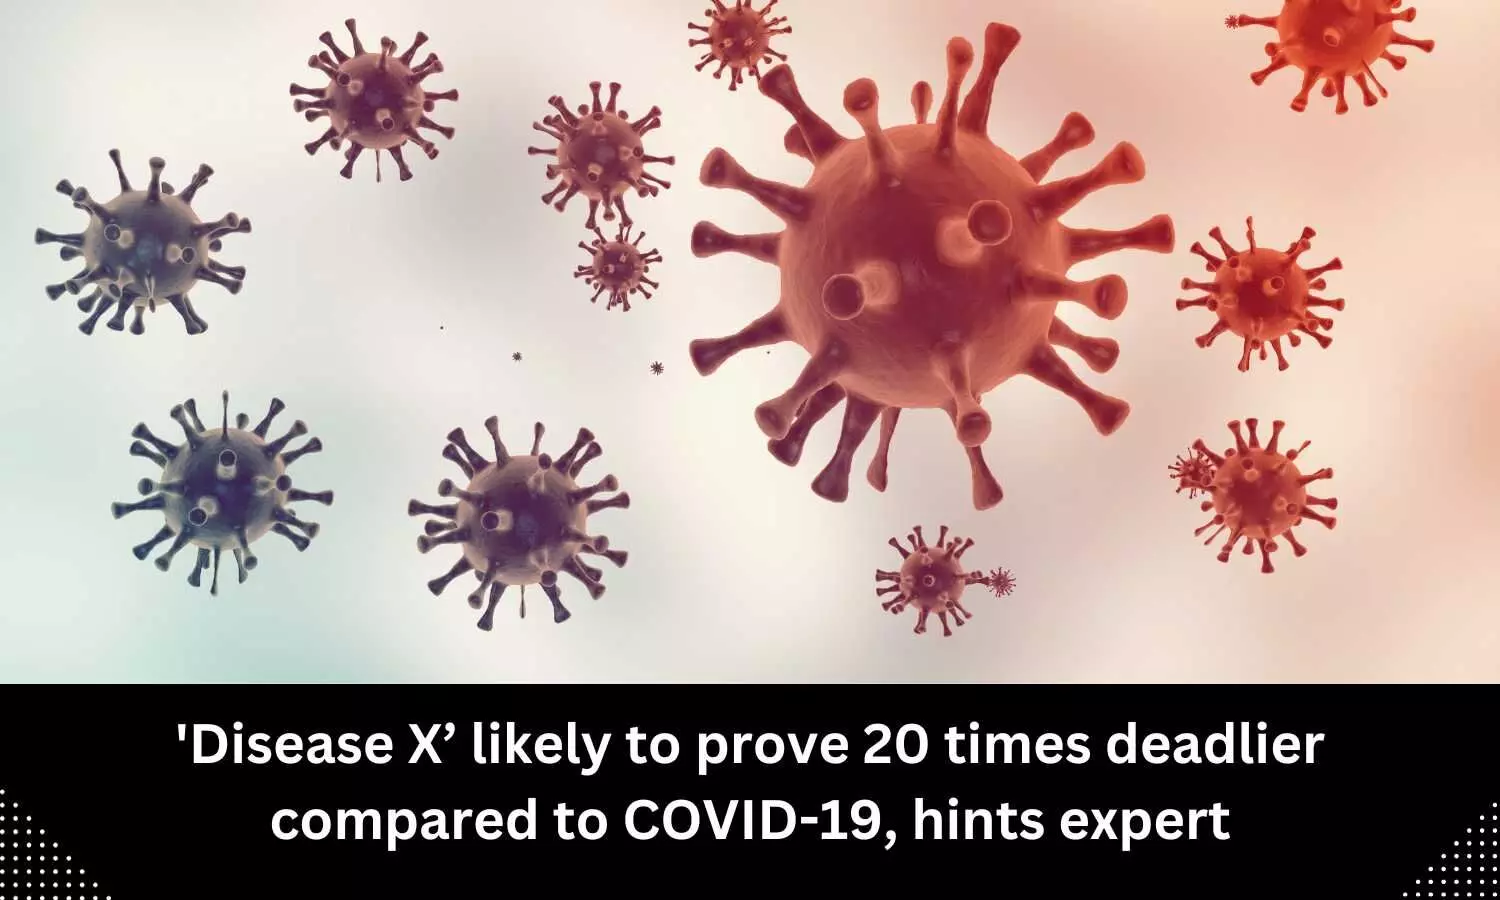 Disease X’ likely to prove 20 times deadlier compared to COVID-19, hints expert